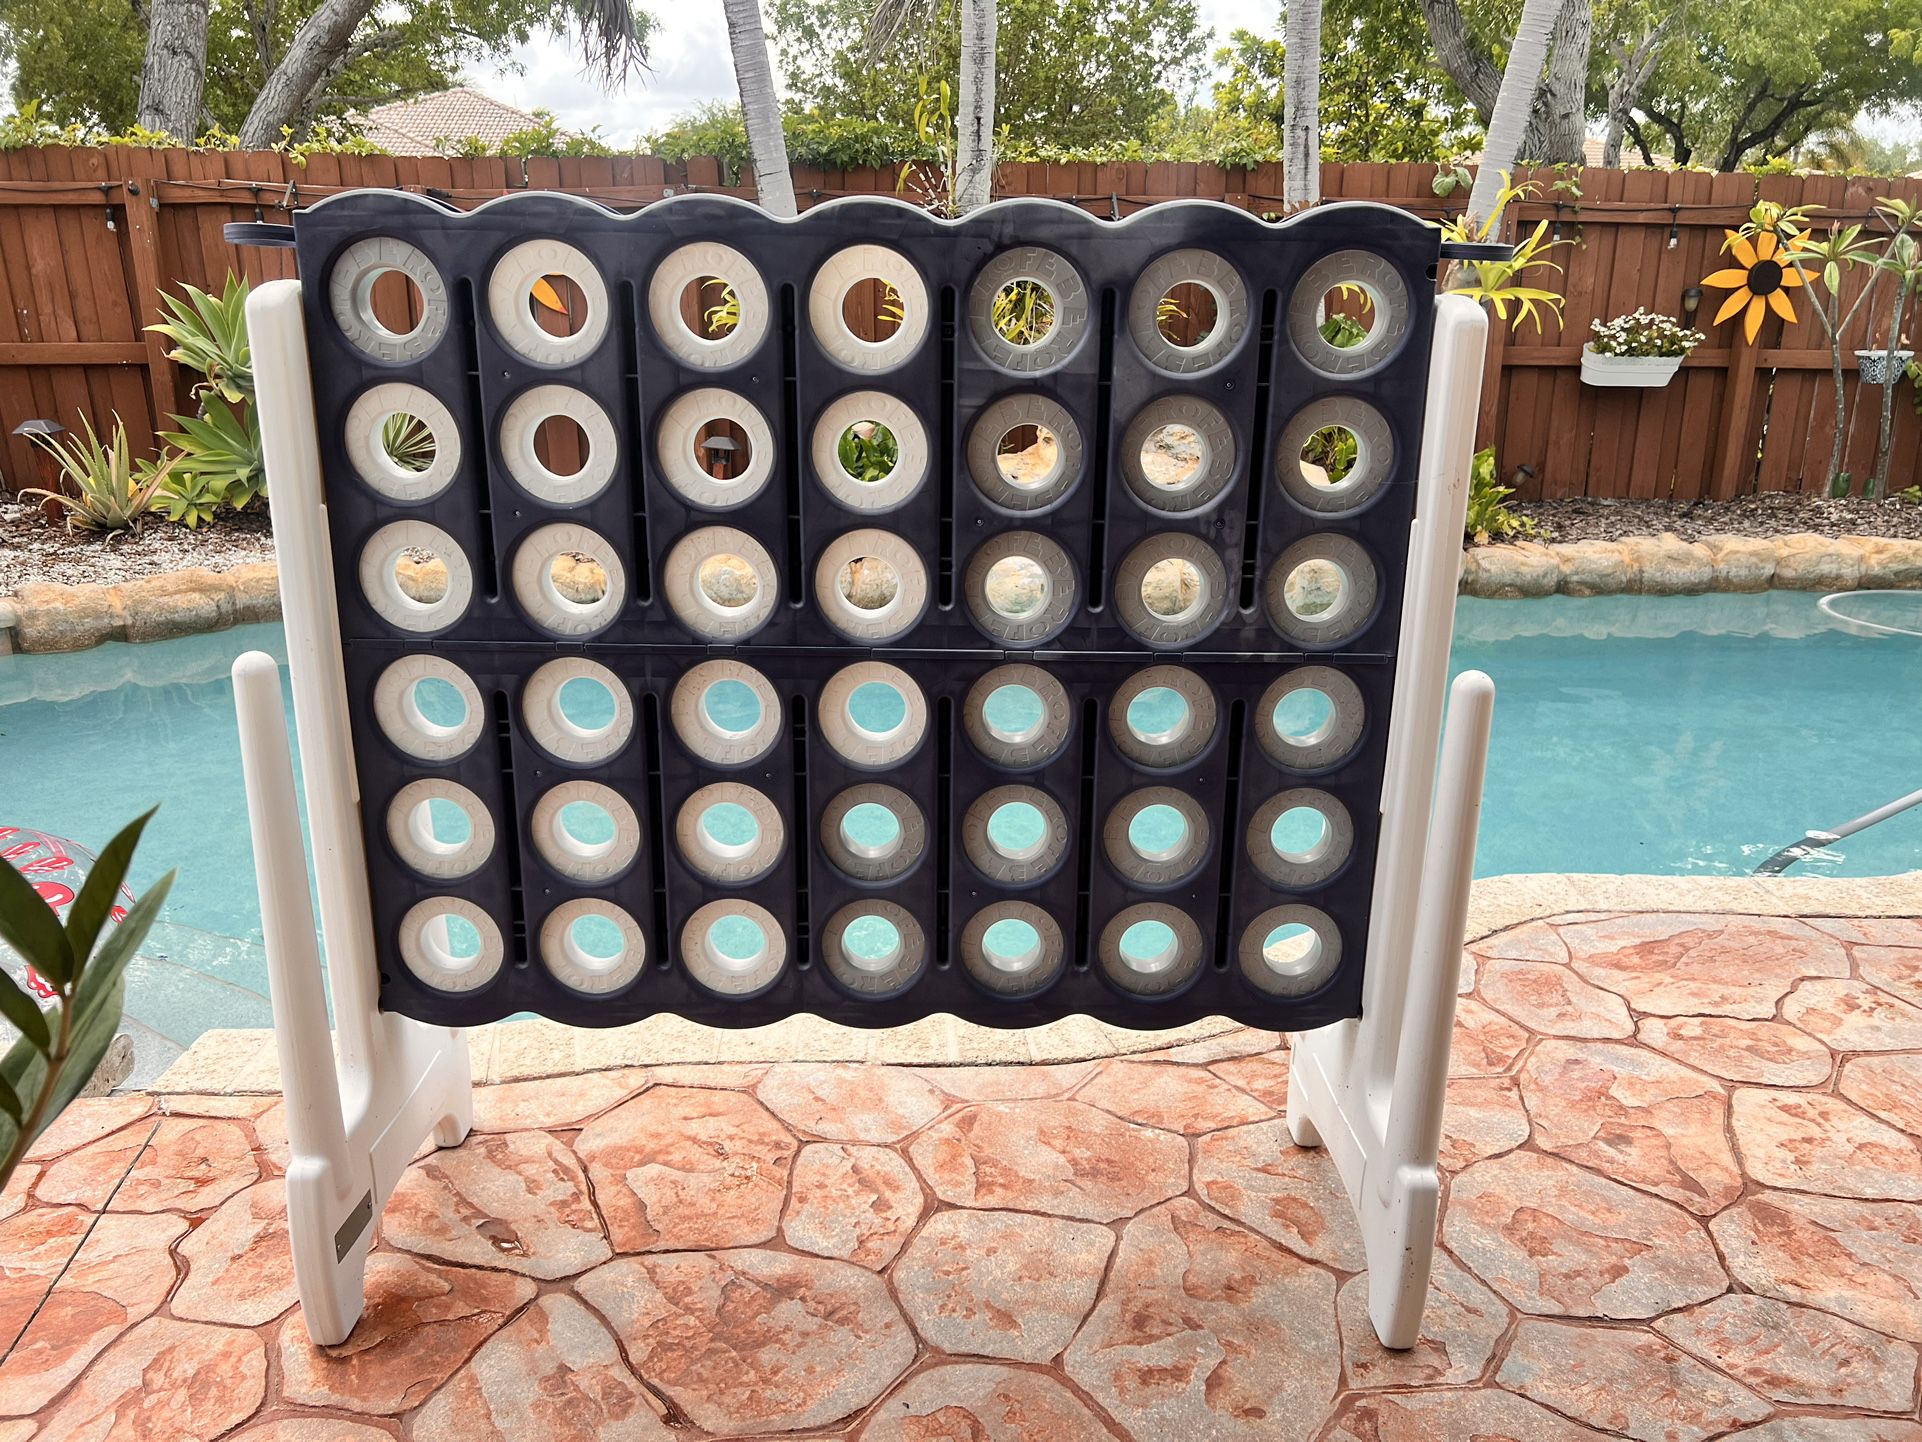 Giant yard Connect Four Game.